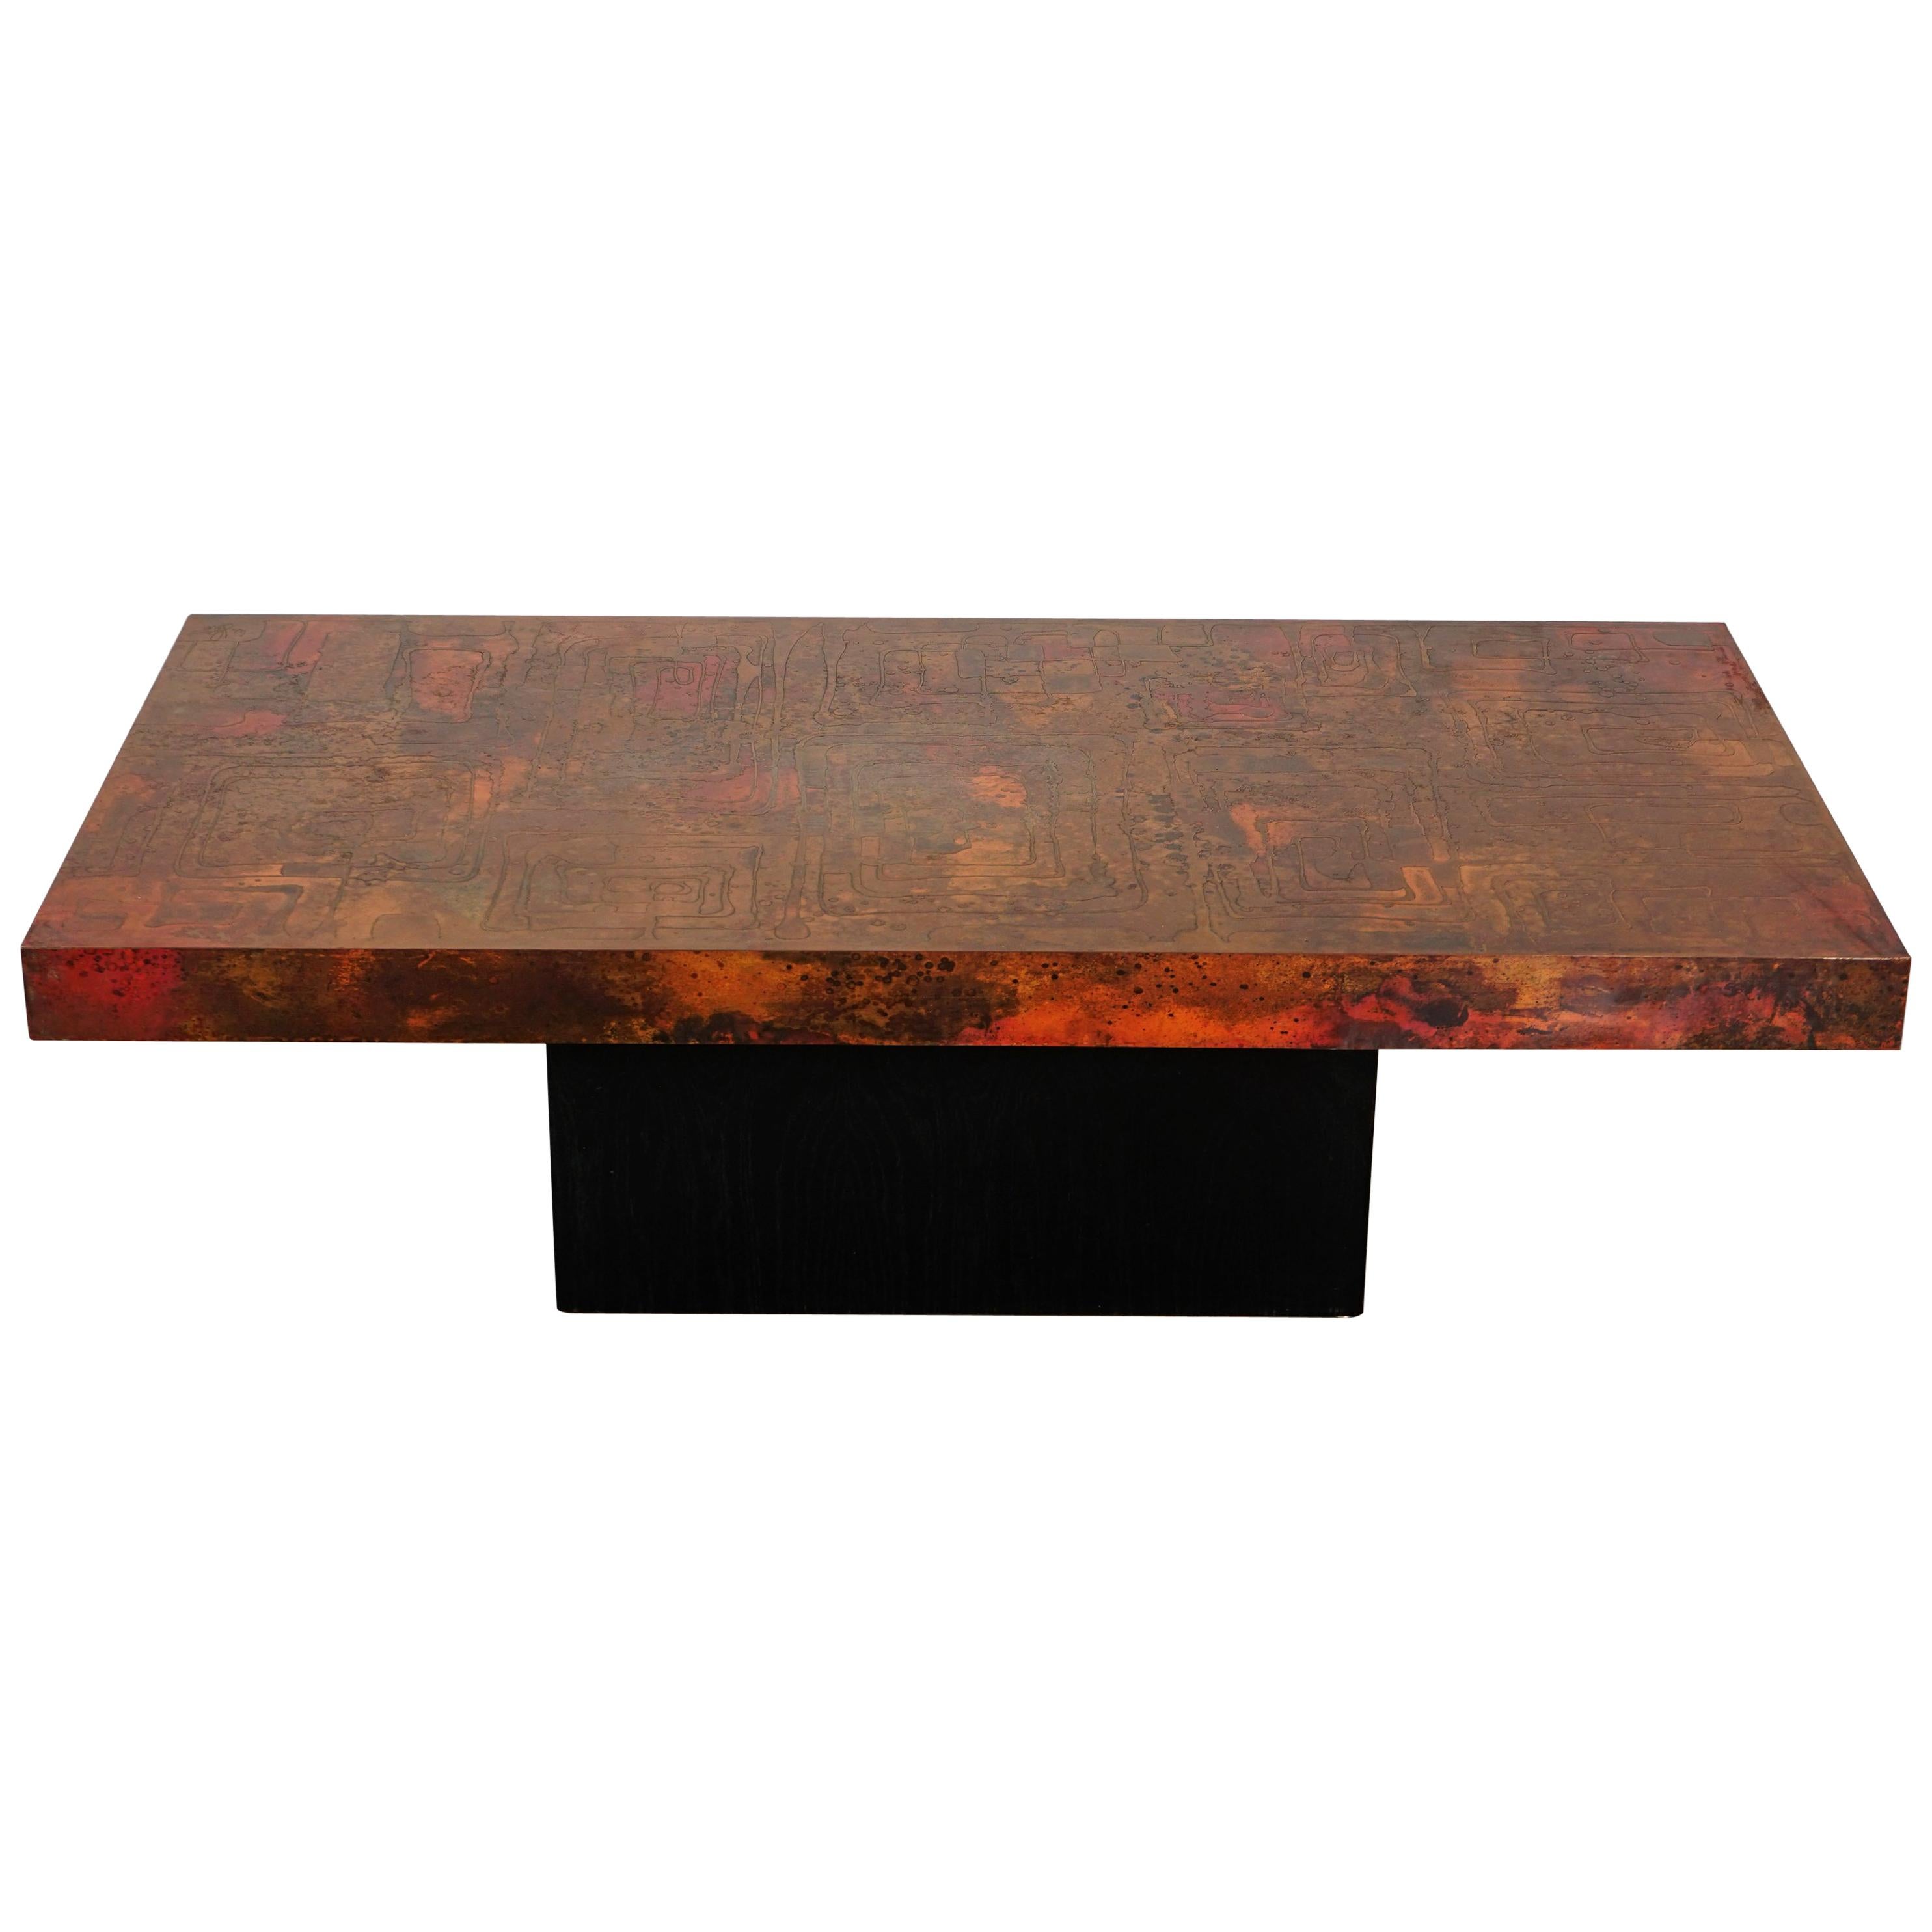 Etched and Fire Oxidized Copper Coffee Table by Bernhard Rohne, 1960s For Sale